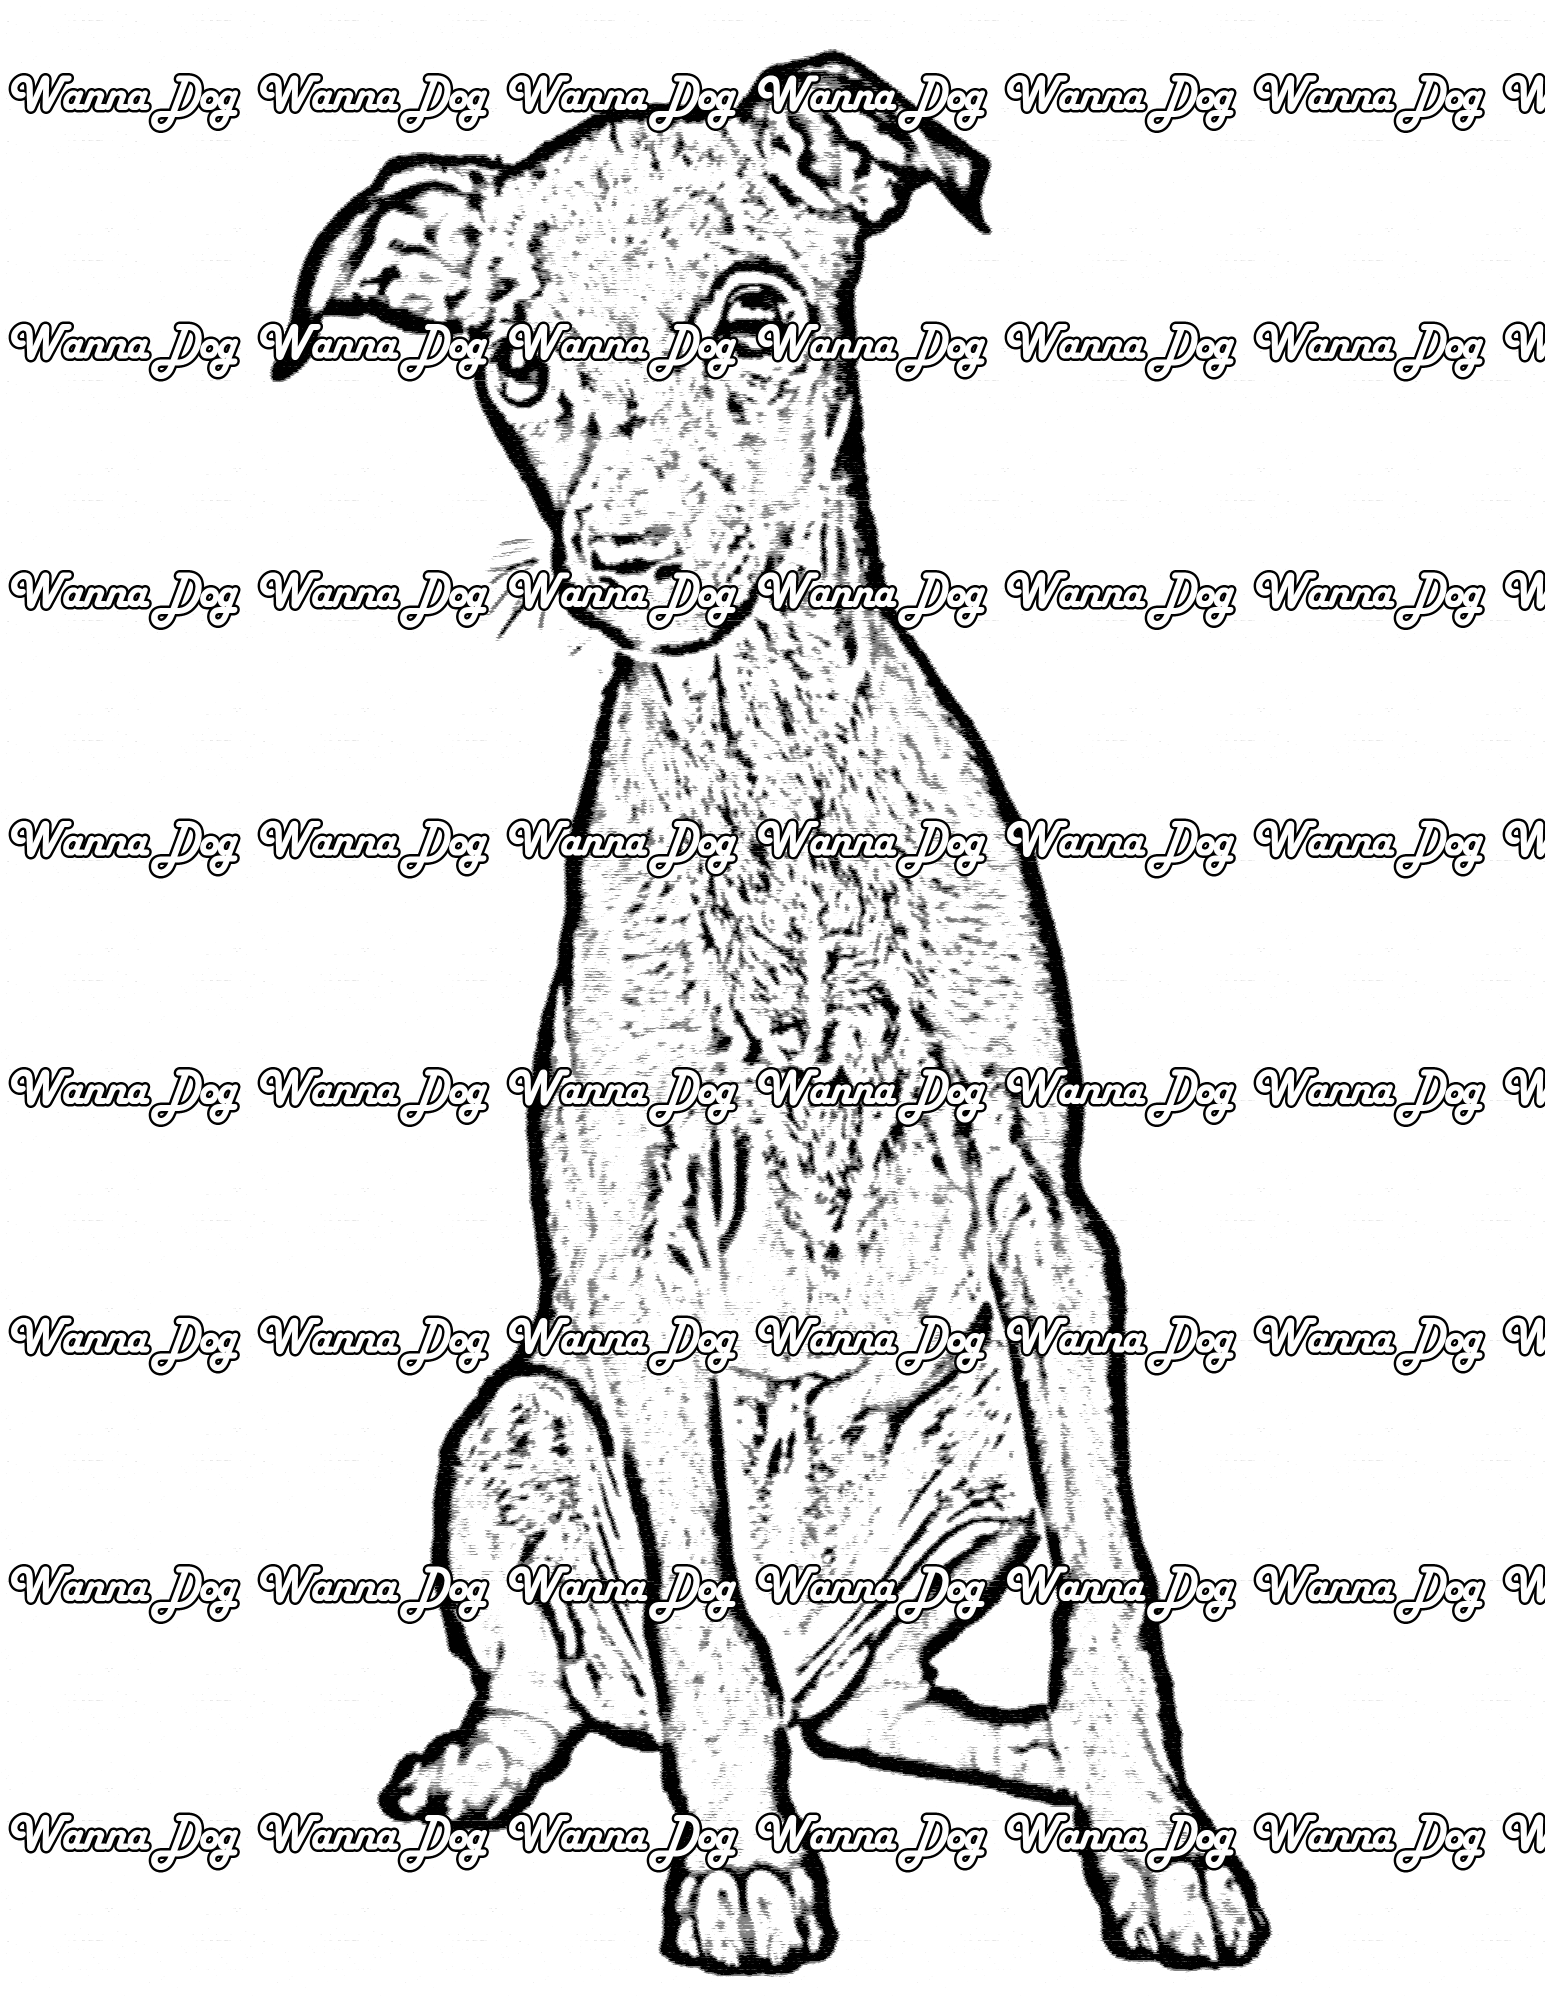 Greyhound Coloring Page of a Greyhound puppy sitting and posing